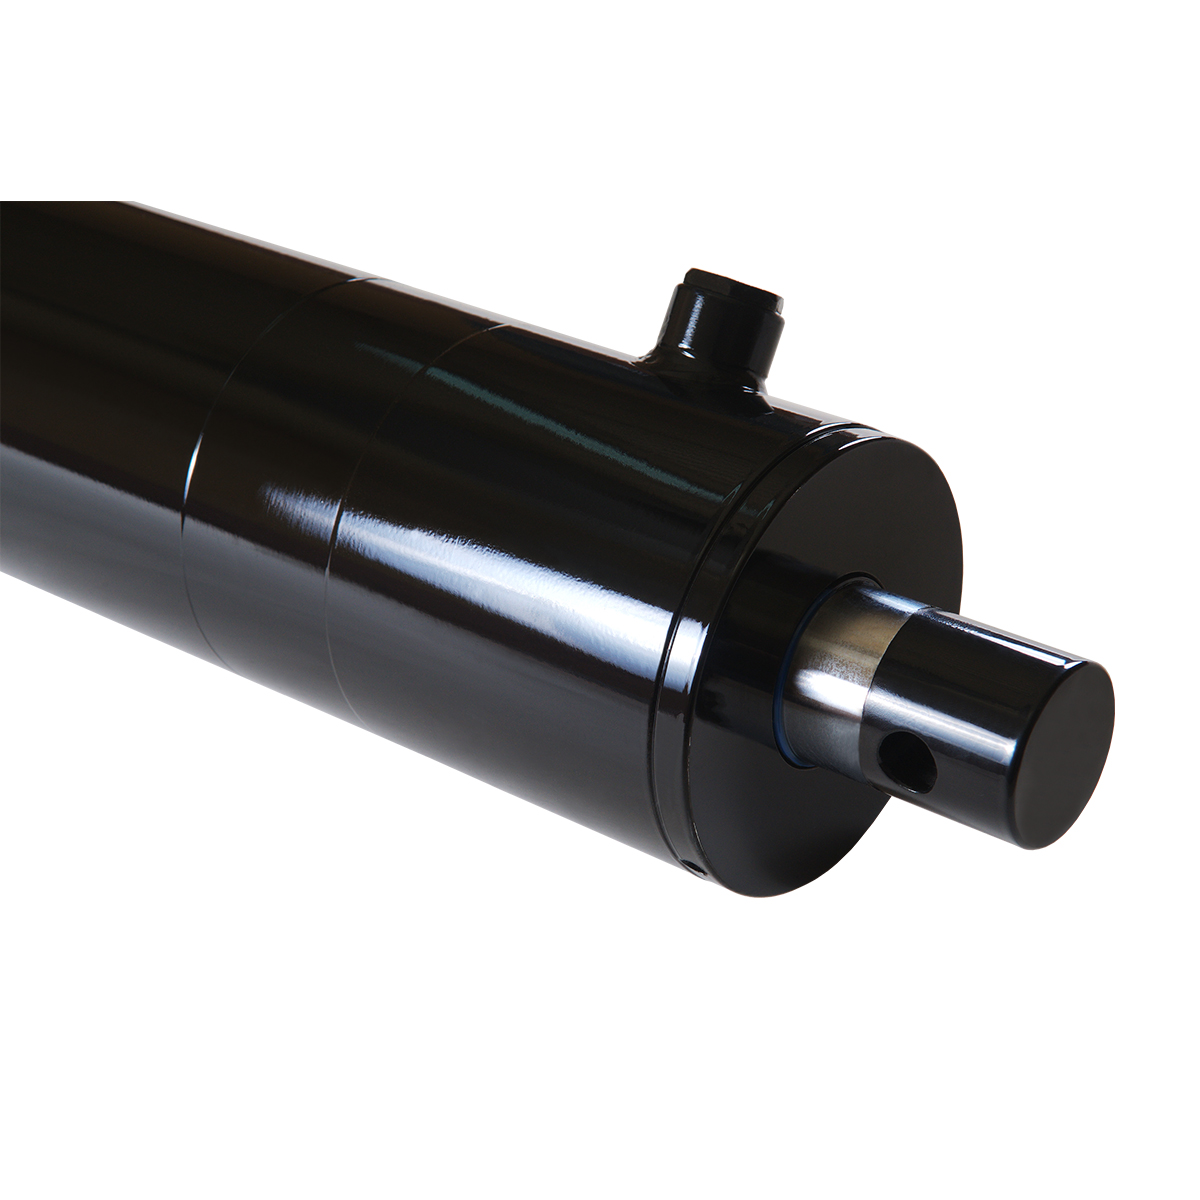 5 bore x 30 stroke hydraulic cylinder, log splitter double acting cylinder | Magister Hydraulics